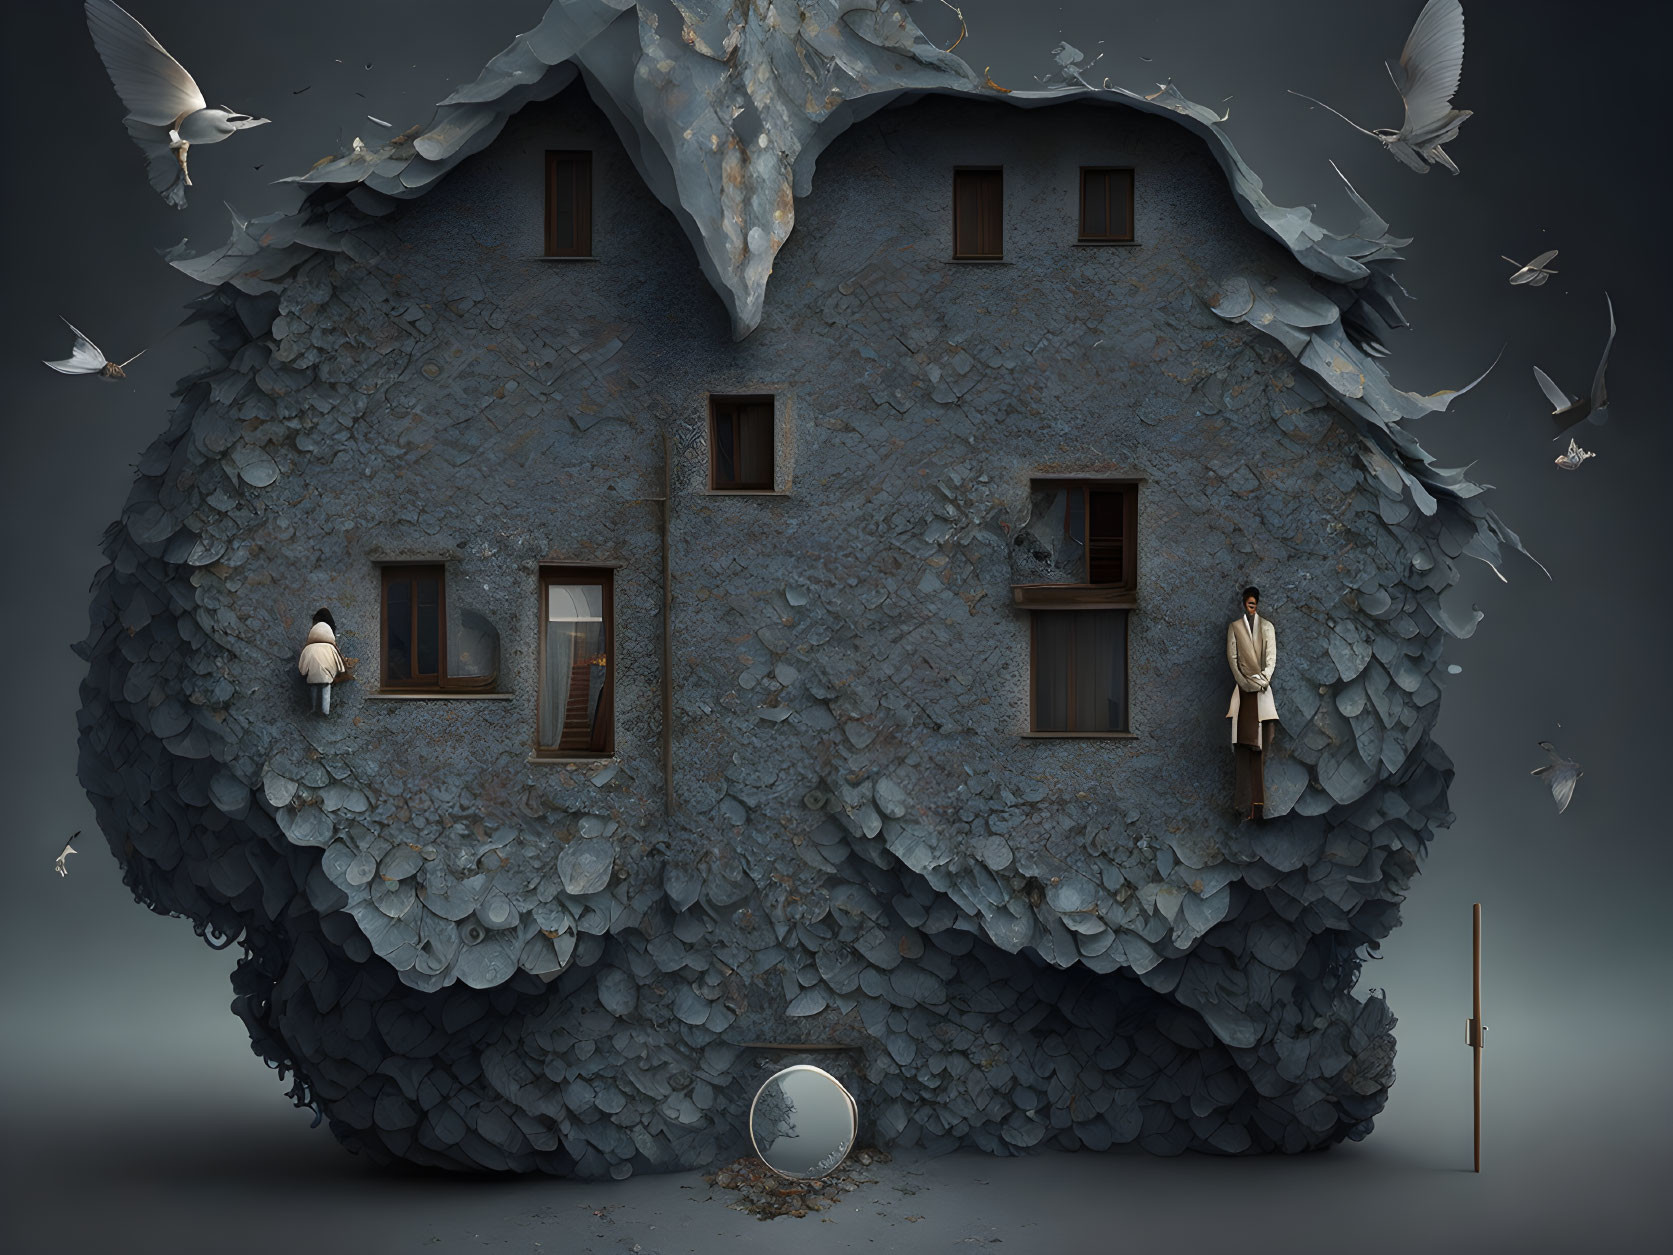 Surreal heart-shaped house with blue scales, people in windows, and birds flying.